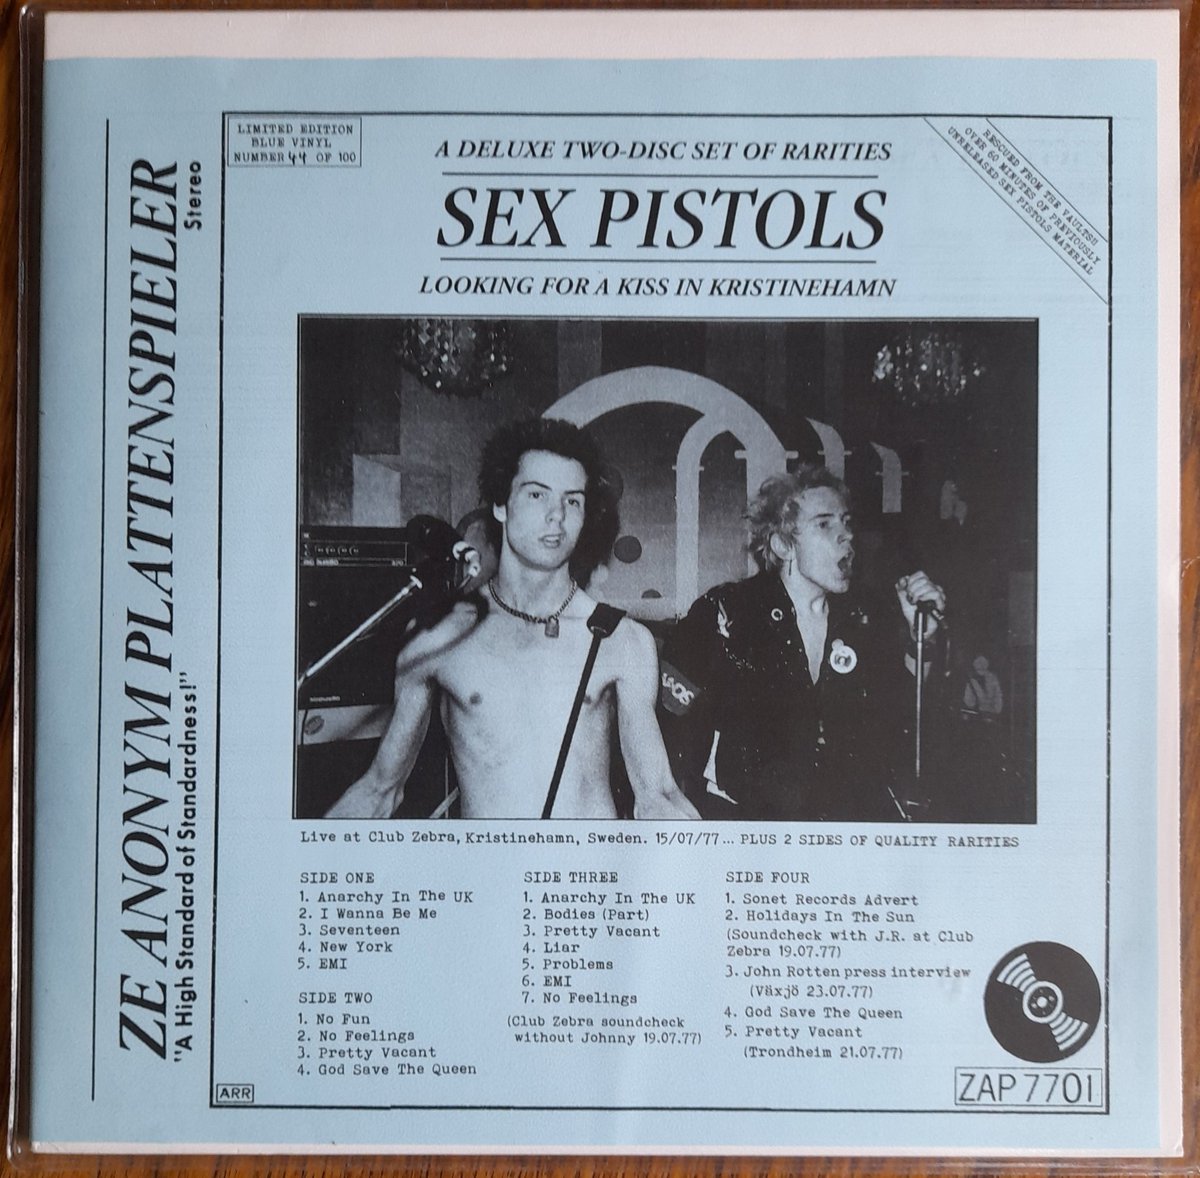 Just in - Sex Pistols: Looking For A Kiss In Kristinehamn. On first pass, comes across as the most significant @sexpistols archive release since 2020's (poorly packaged/presented/will-this-do) 76/77 box. This is quite something, best Sid-era item ever?? More on it in due course.